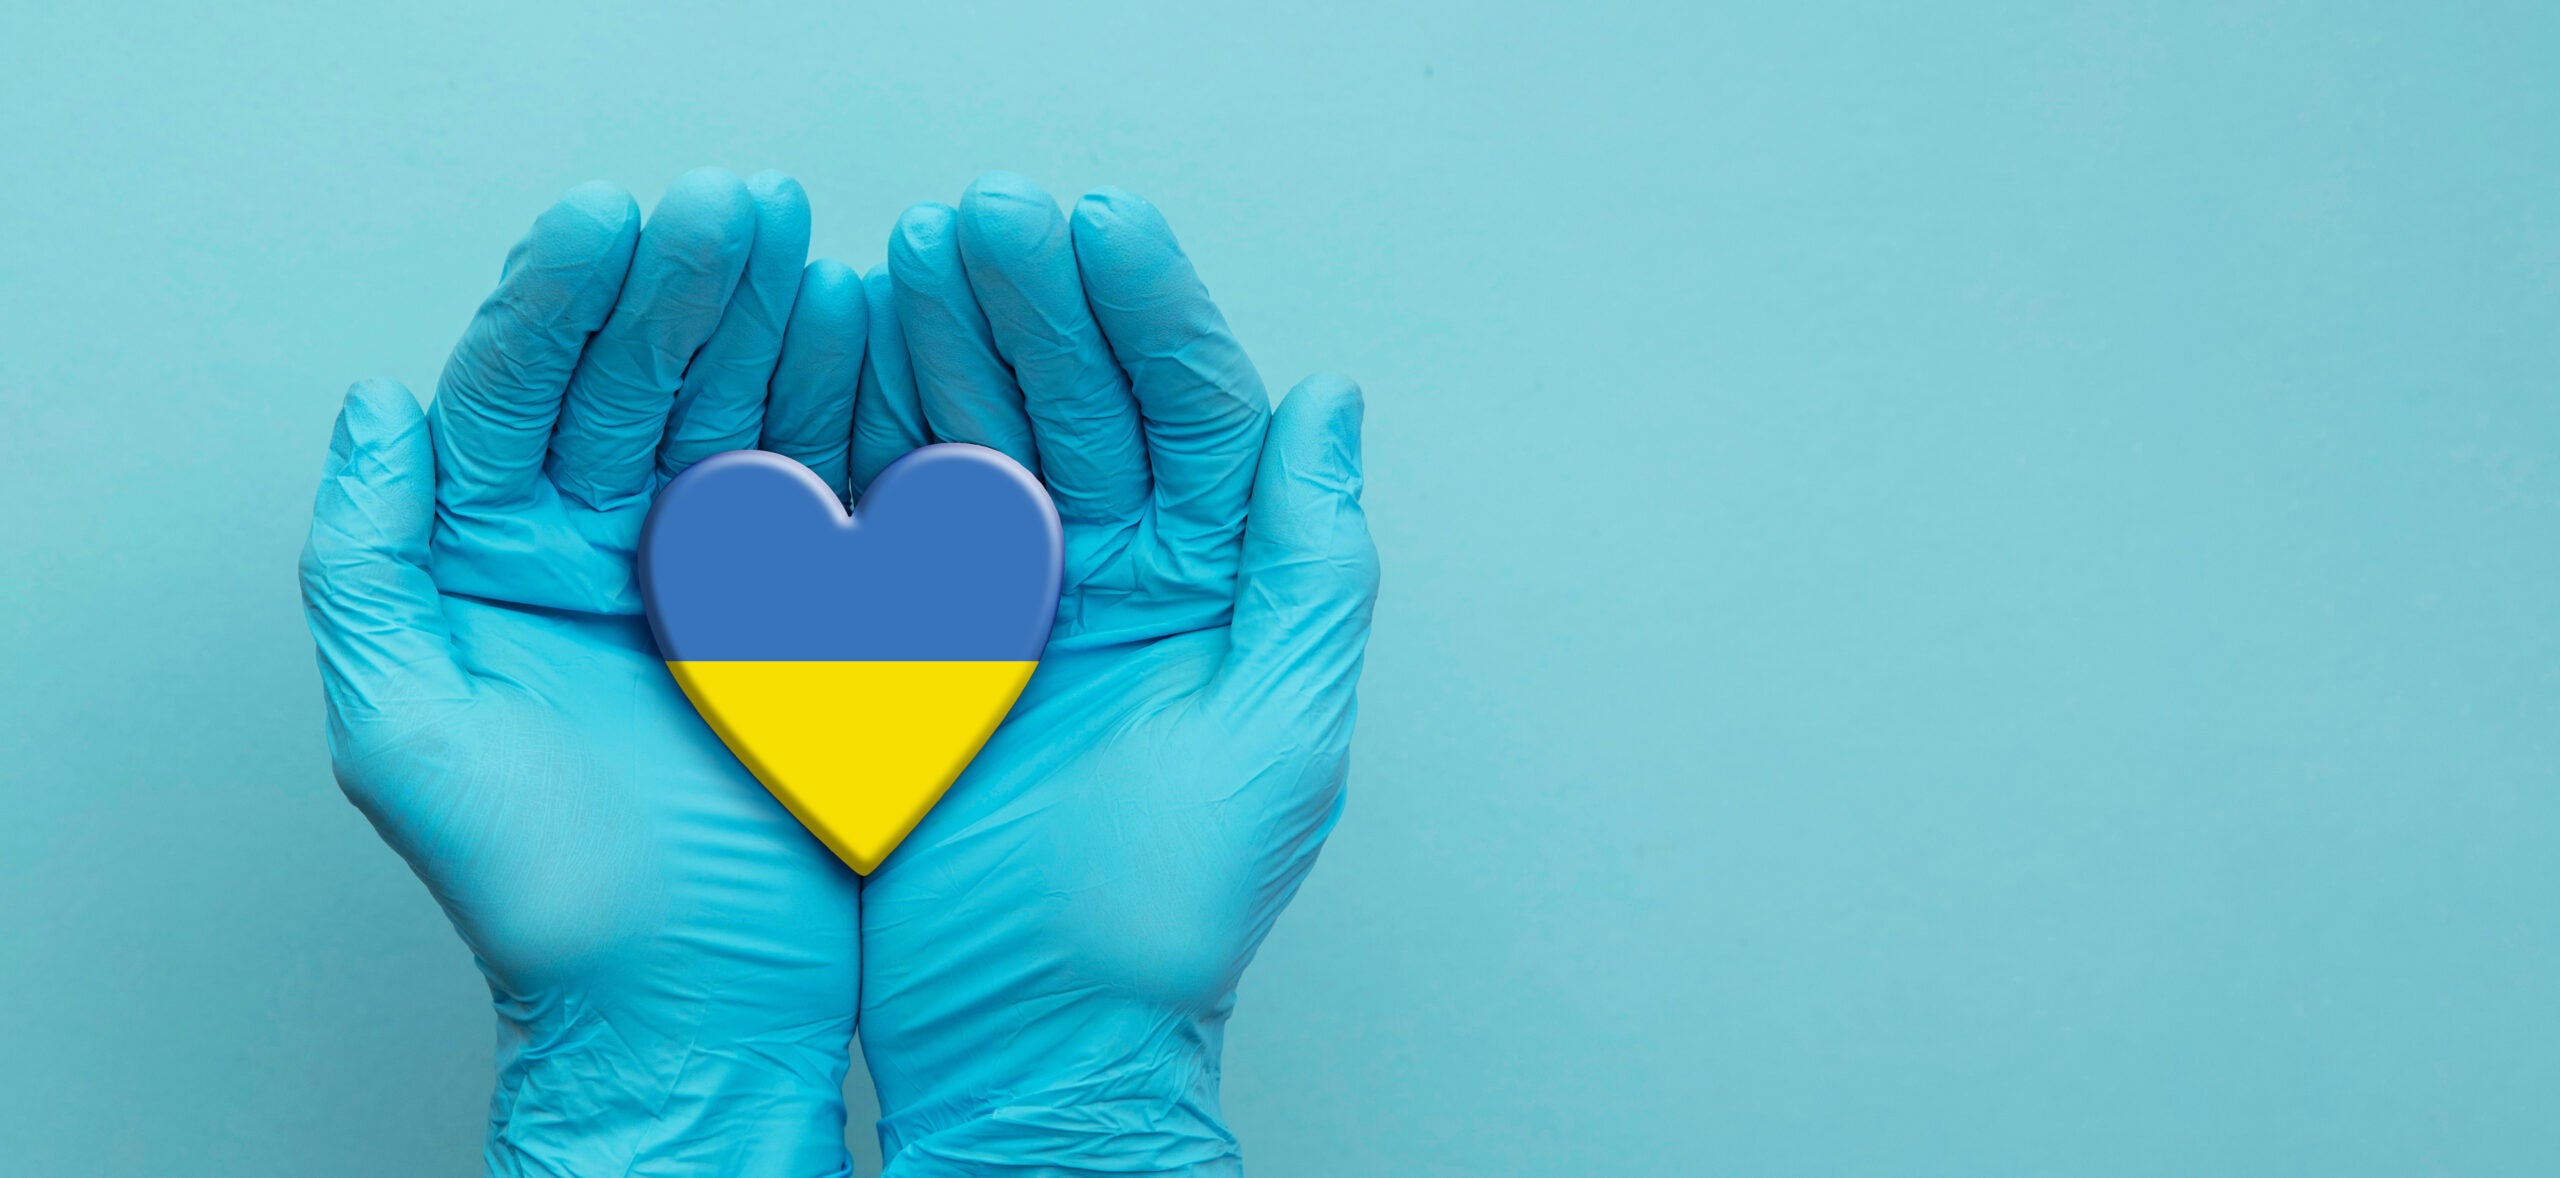 A pair of hands in blue surgical gloves cradles a hear in the colors of the Ukrainian flag against a light blue background.